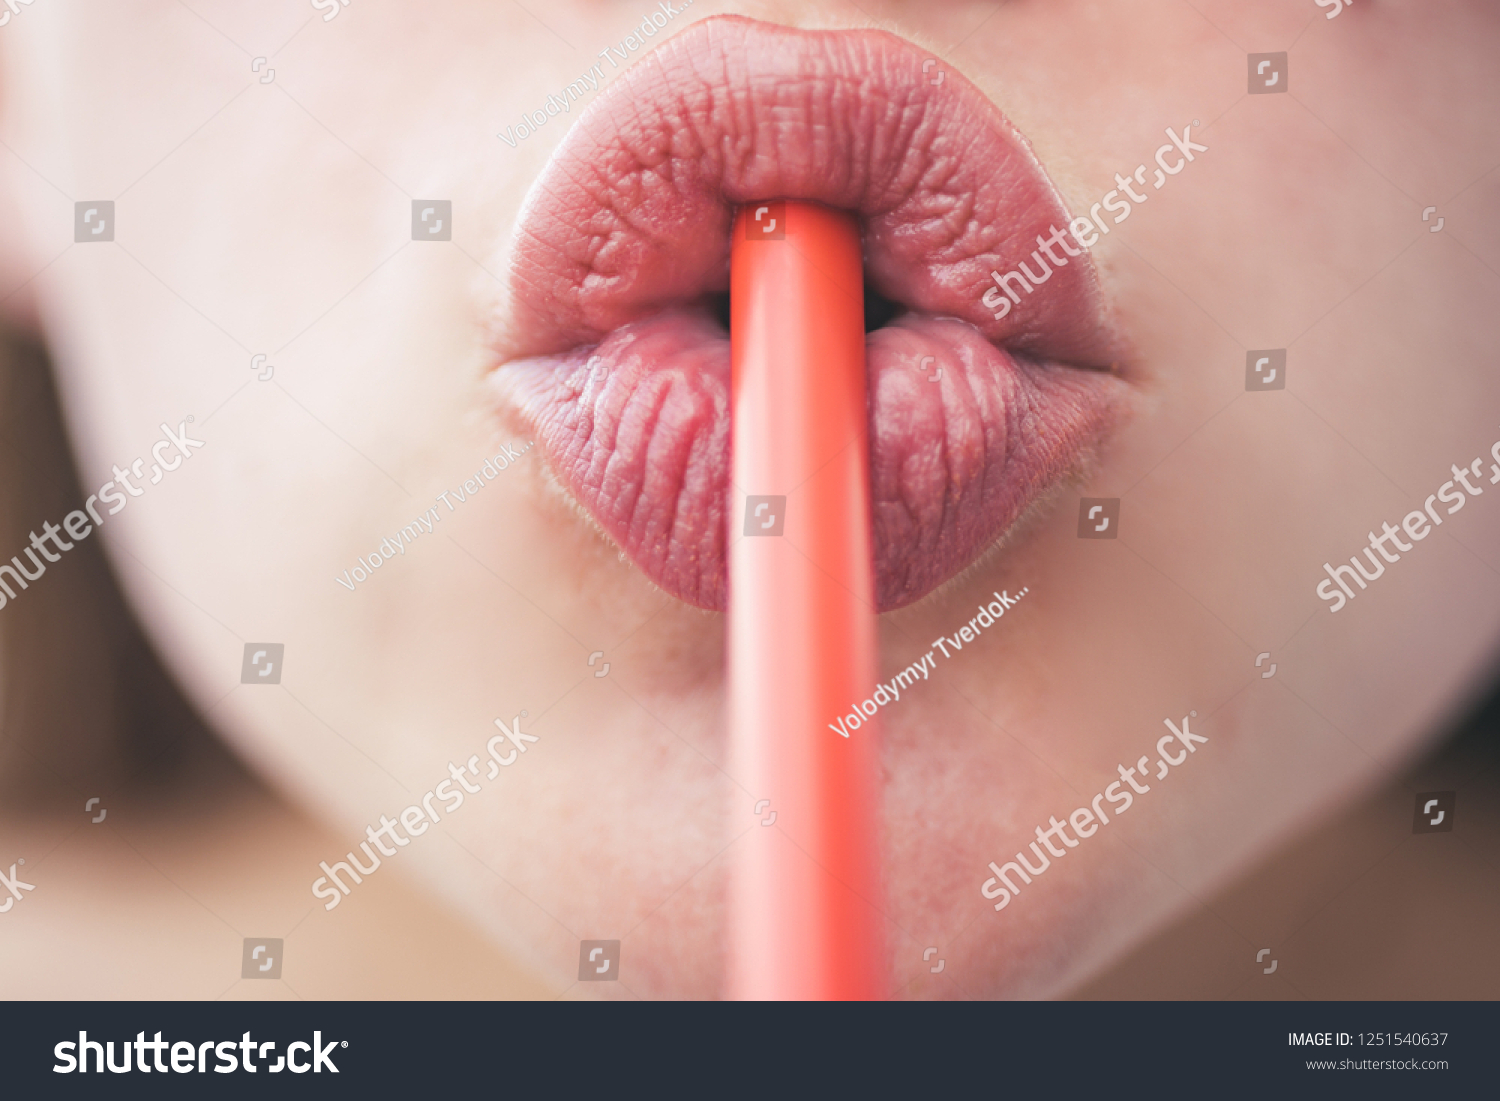 Drinking Straw Day. Sipping drink through straw. Female lips while drinking with straw. Drinking tube is a small pipe to consume a beverage. Orange plastic tube. Drinking straw in mouth. #1251540637